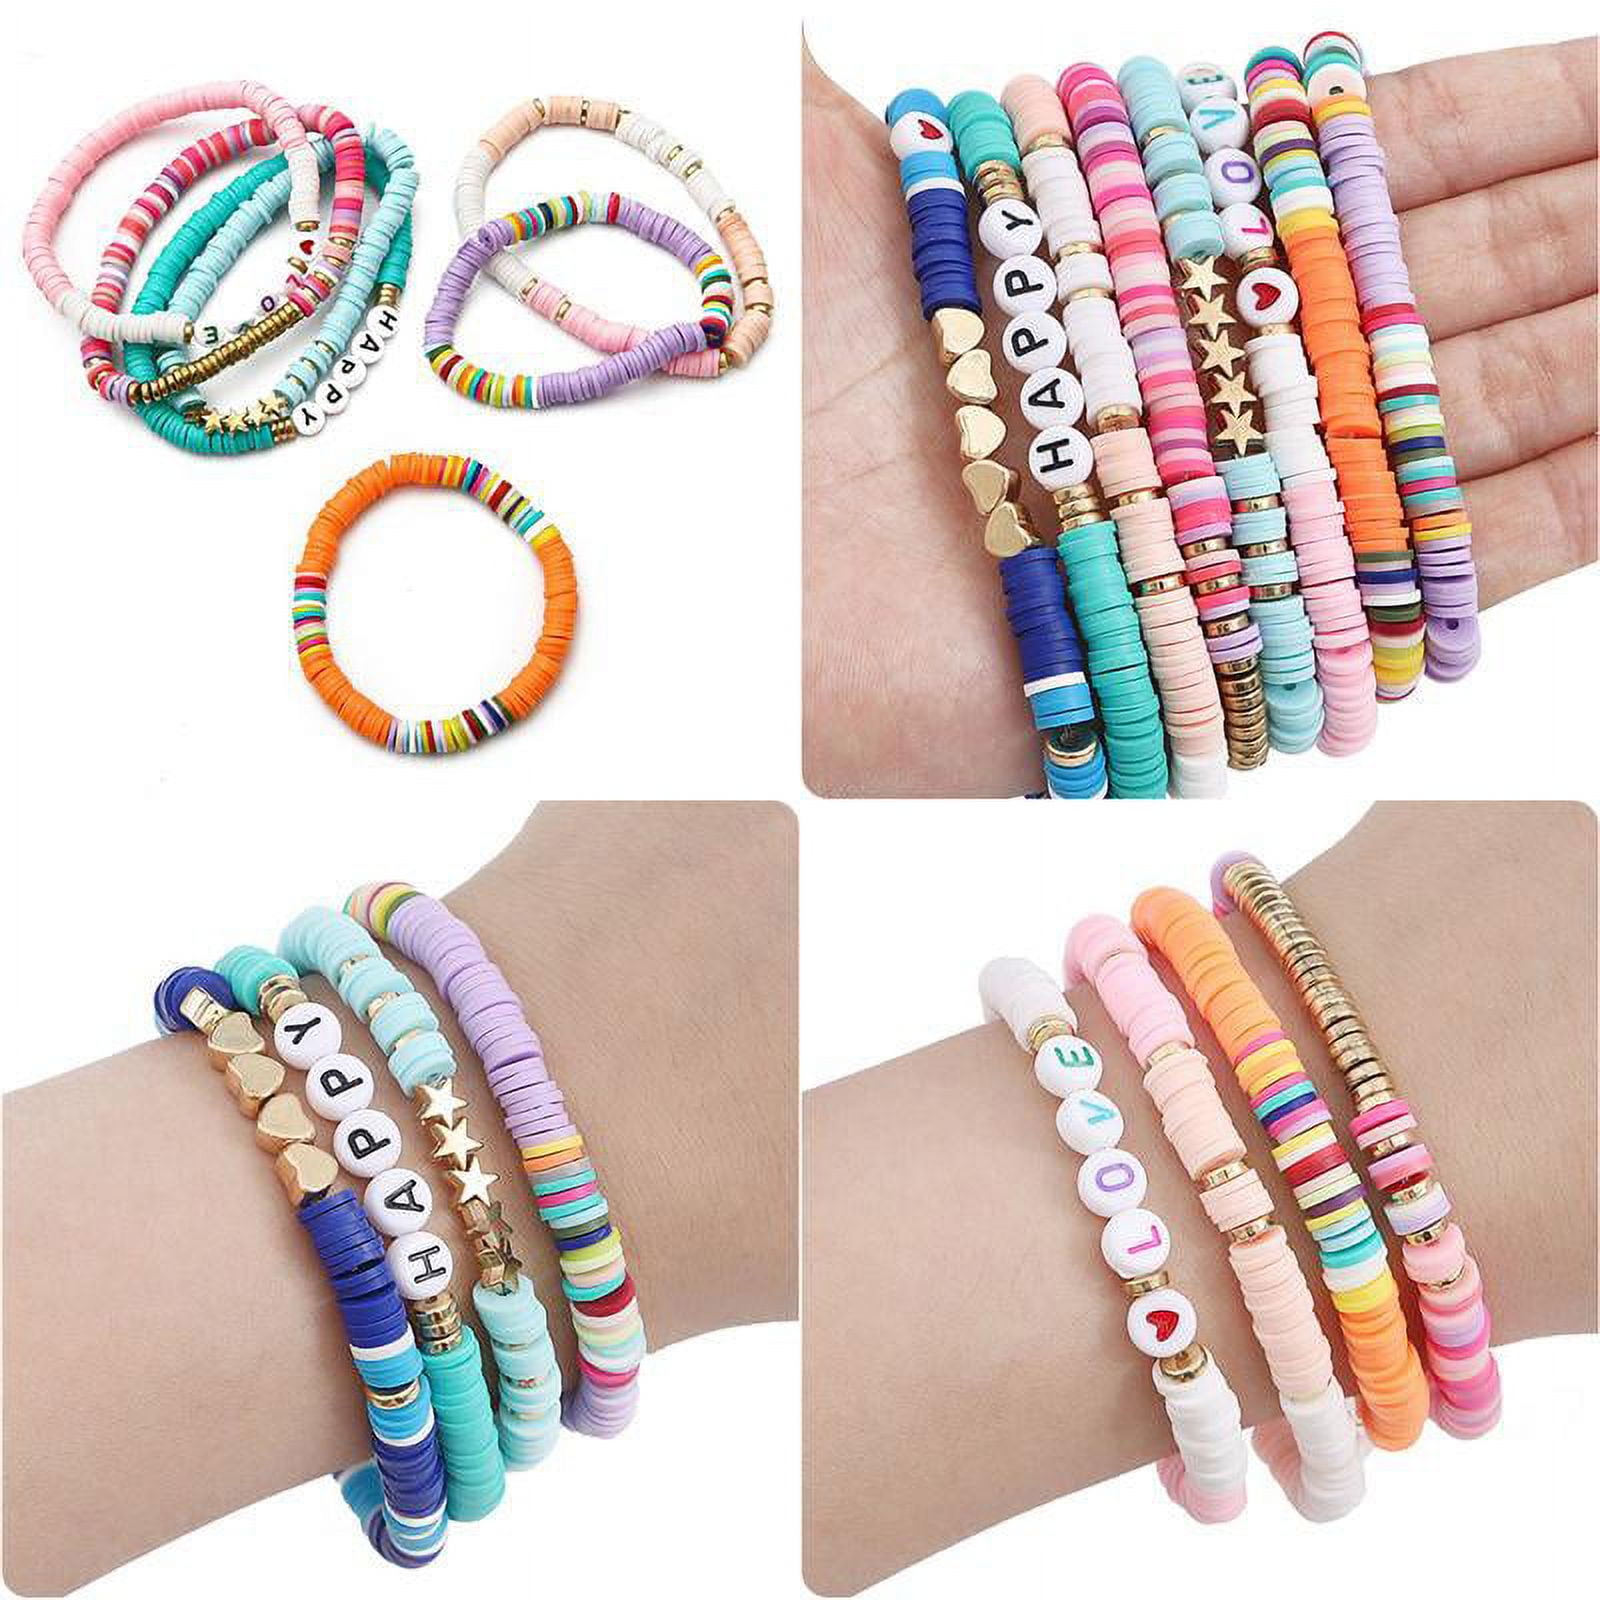 Mardiko 6000 Pcs Clay Beads Bracelet Making Kit For Girls With Smiley Faces Heishi Beads Handmade Multi-Colors Beads Set For Diy Necklace Earring